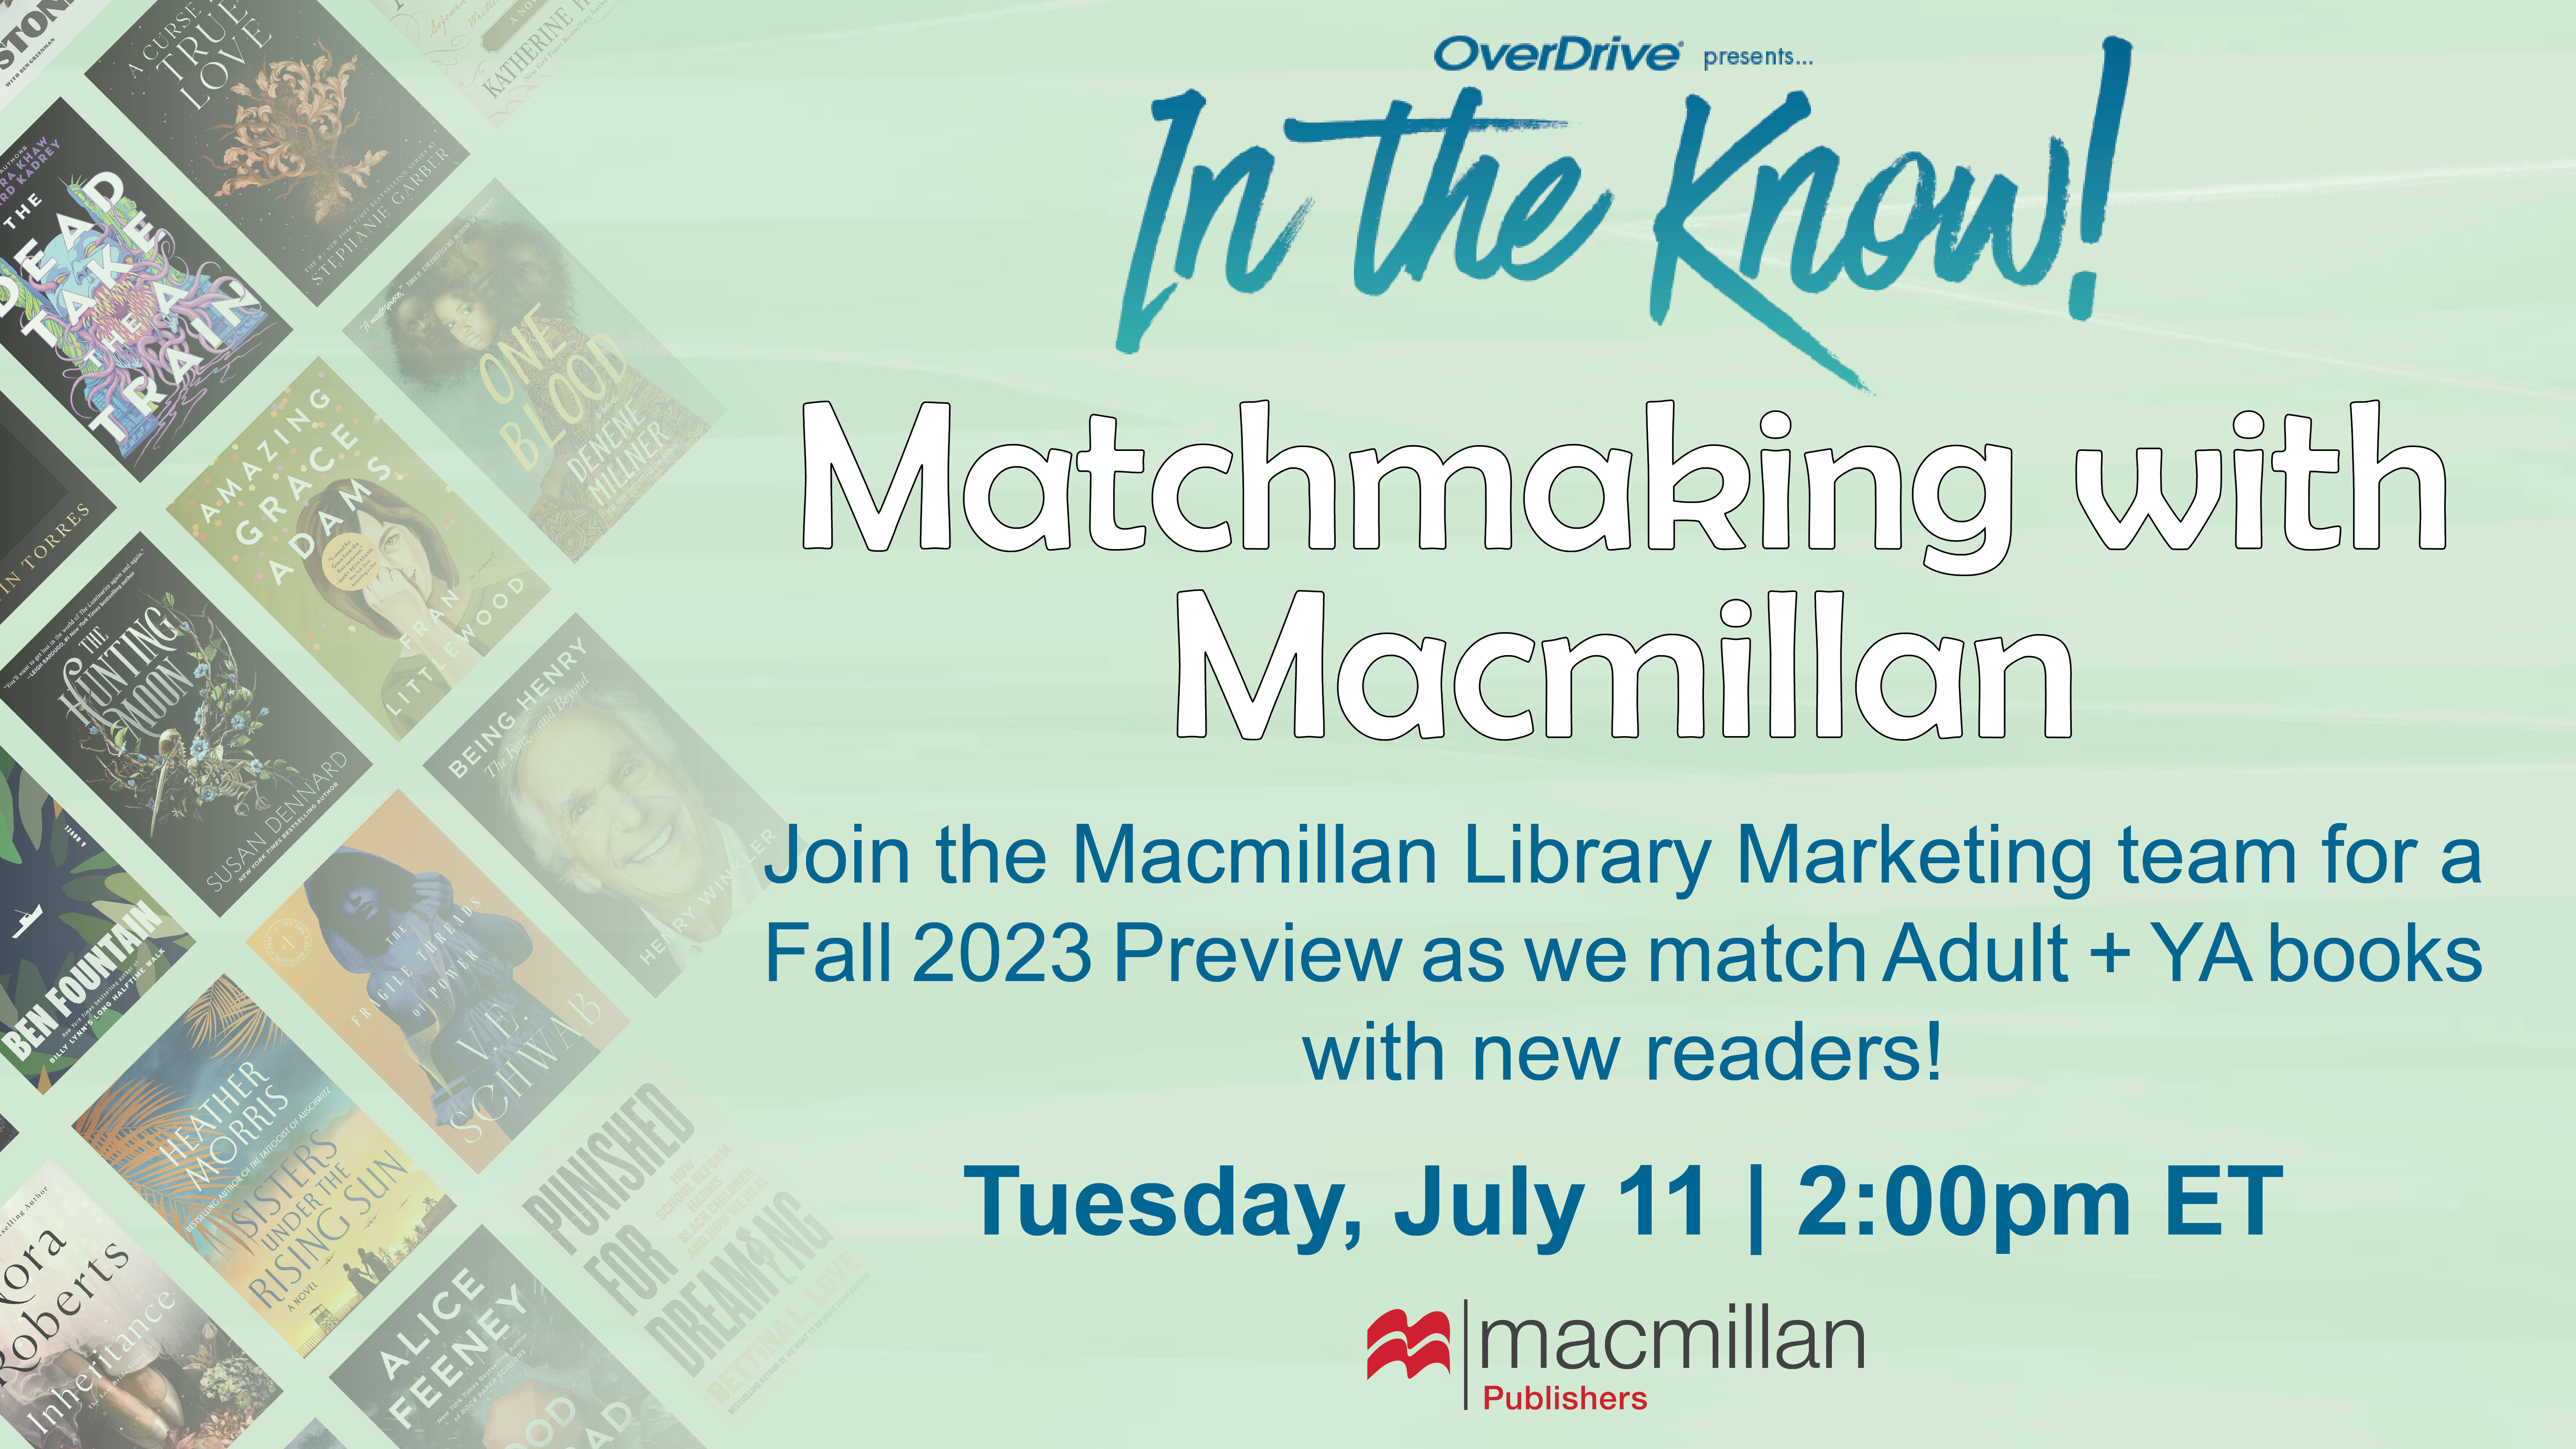 Join the Macmillan Library Marketing team for a Fall 2023 preview as we match adult and YA books with new readers. Tuesday, July 11 at 2pm ET